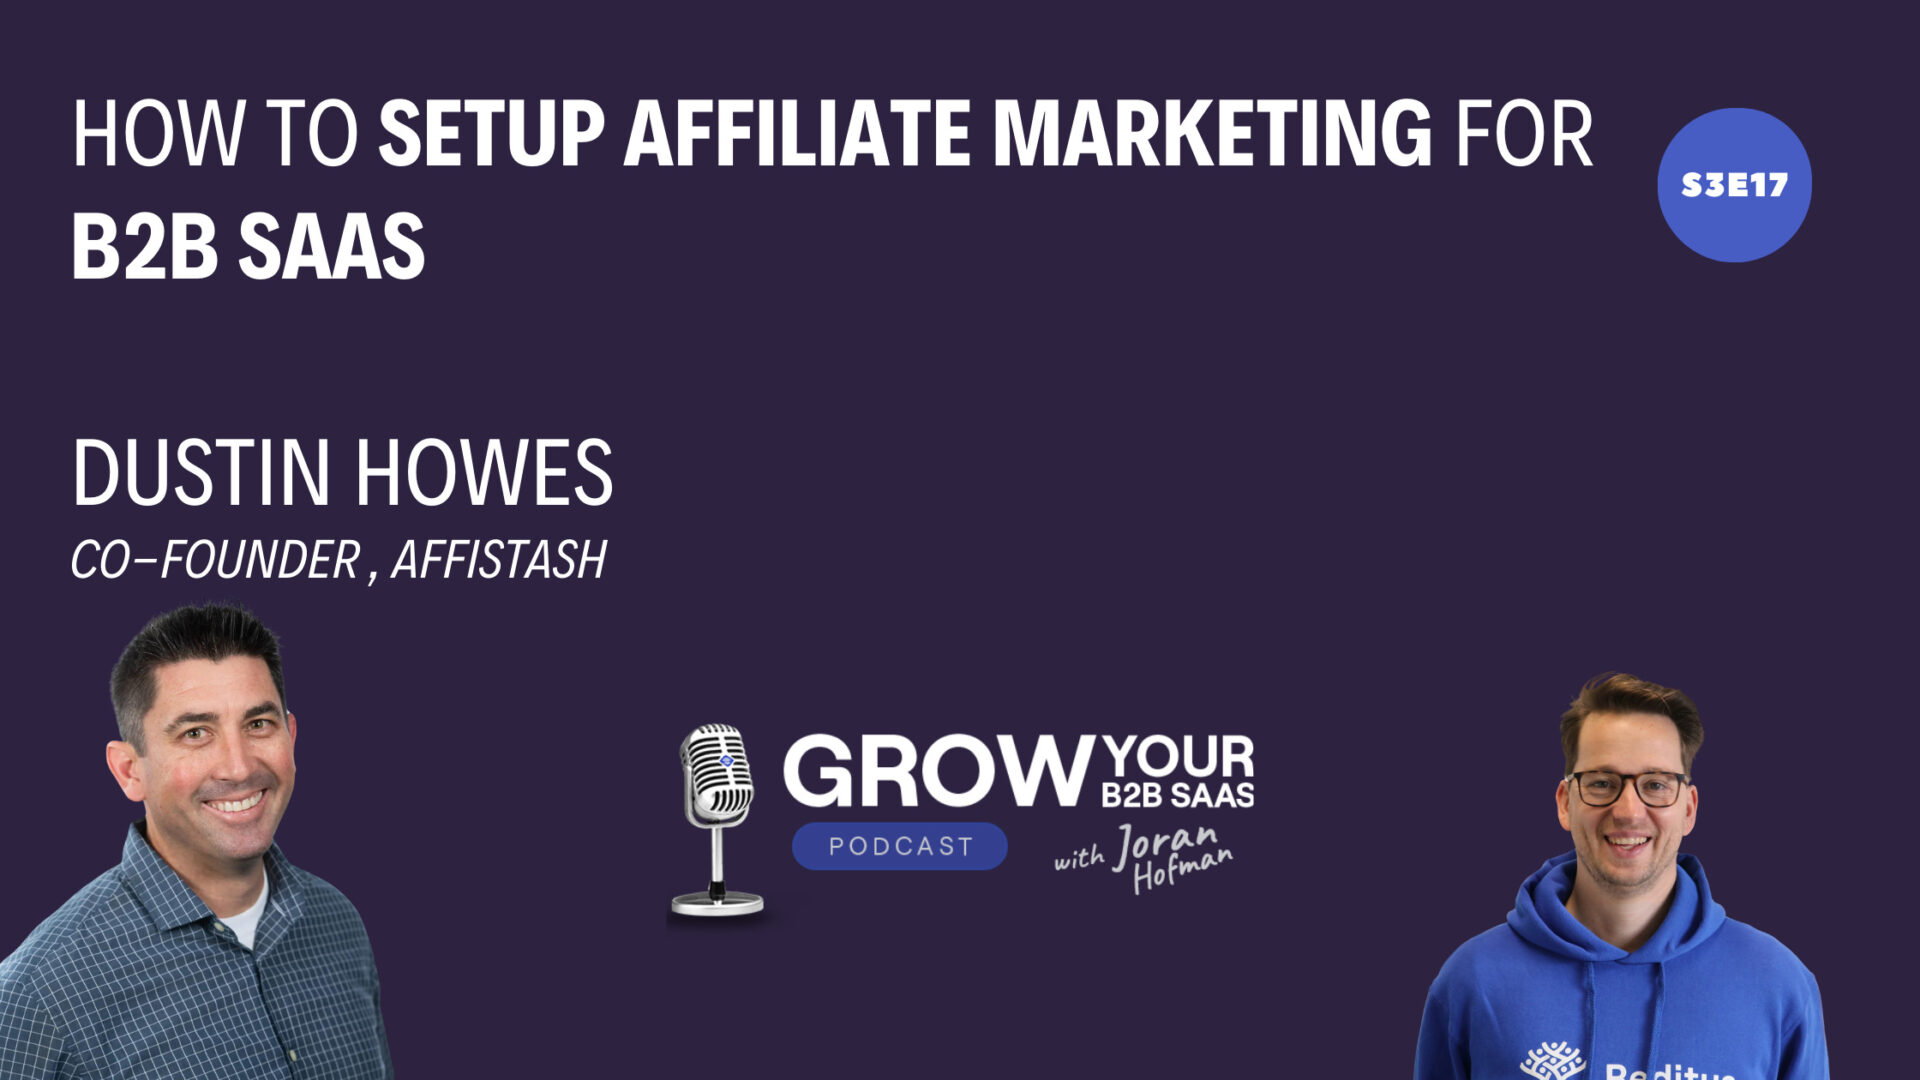 S3E17 – How to setup affiliate marketing for B2B SaaS with Dustin Howes